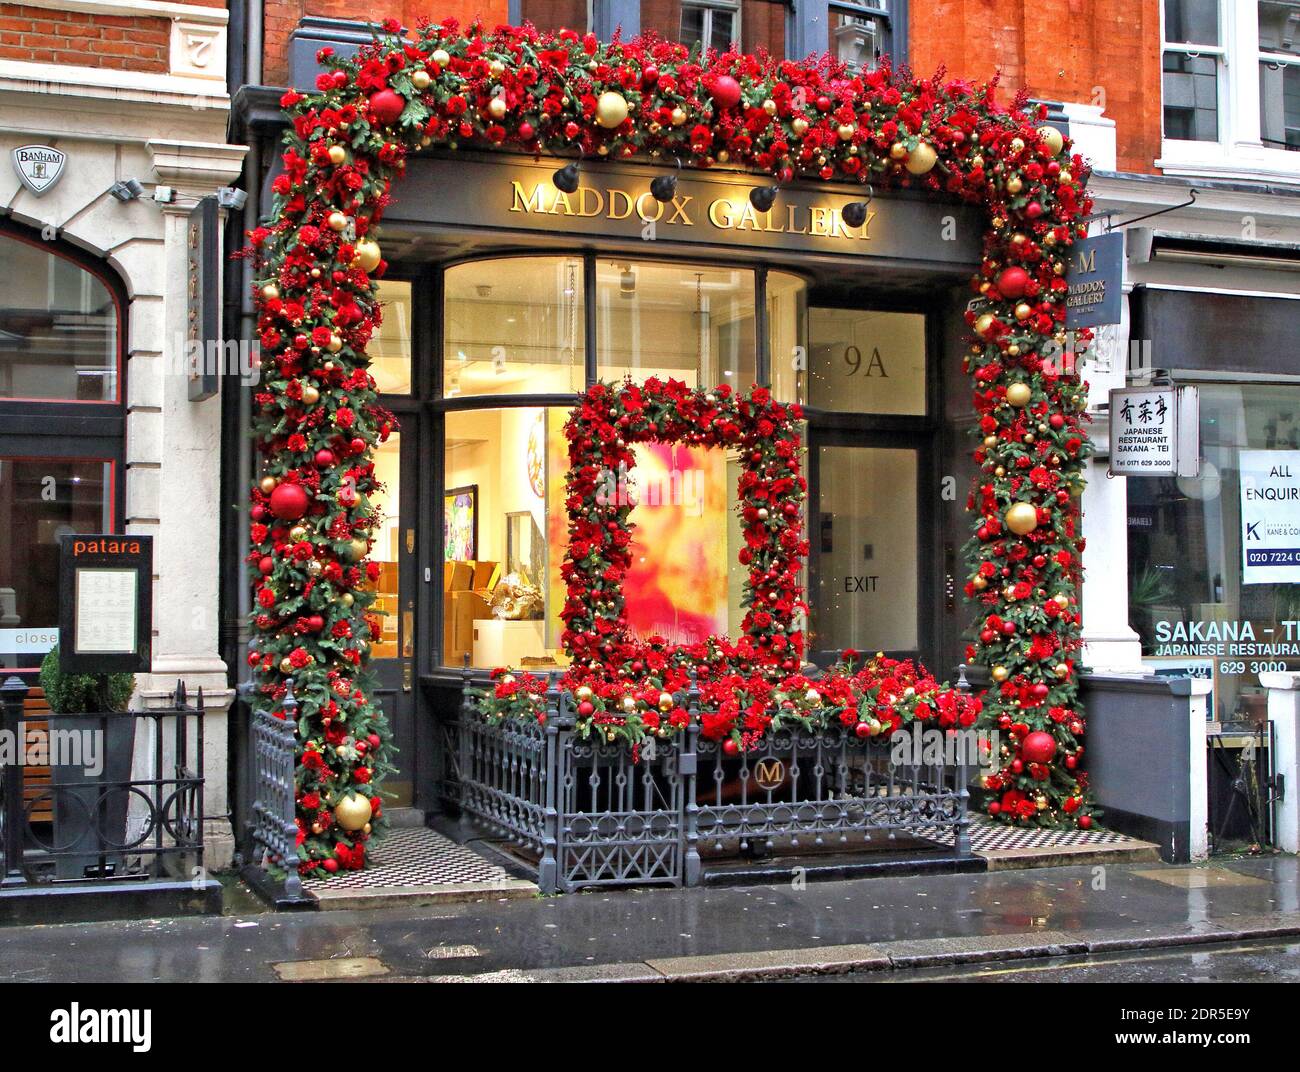 London, UK. 19th Dec, 2020. Colourful red flowers and baubles outside Maddox Gallery near Regent Street.Despite London being placed under extremely high Tier 4 restrictions to prevent the spread of Covid-19, with indoor venues, non essential retail and clubs all closed and inability to trade, there are many colourful Christmas displays around the city. Credit: SOPA Images Limited/Alamy Live News Stock Photo